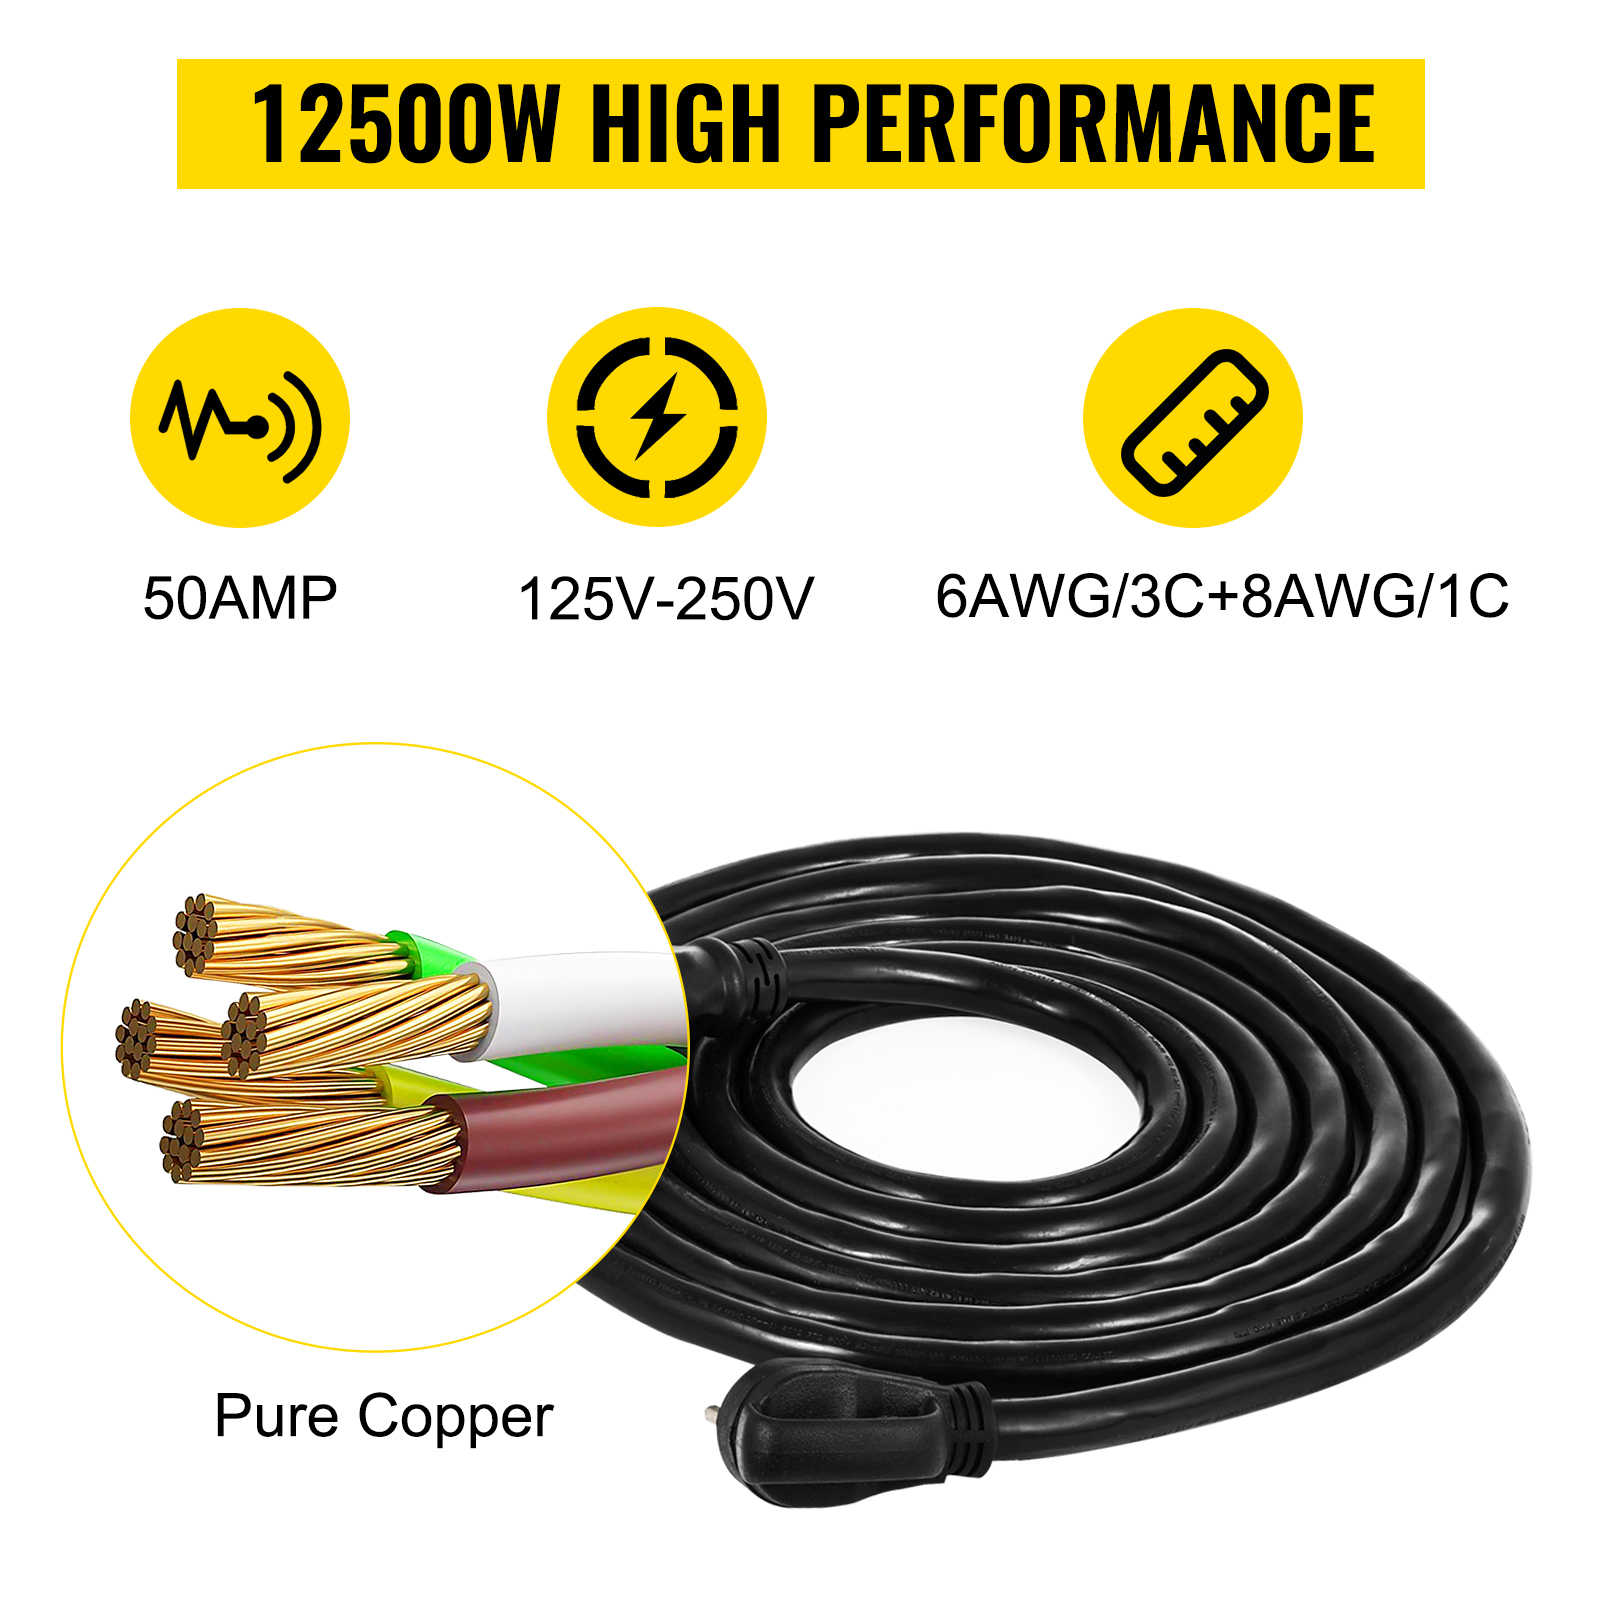 Happybuy RV Shore Power Extension Cord 50FT 50 AMP Weatherproof Heavy Duty  6AWG/3C+8AWG/1C Twist Lock Cord 50 Amp RV Replacement Cord UL and CSA  Approved with Molded Connector and Patented Handle 